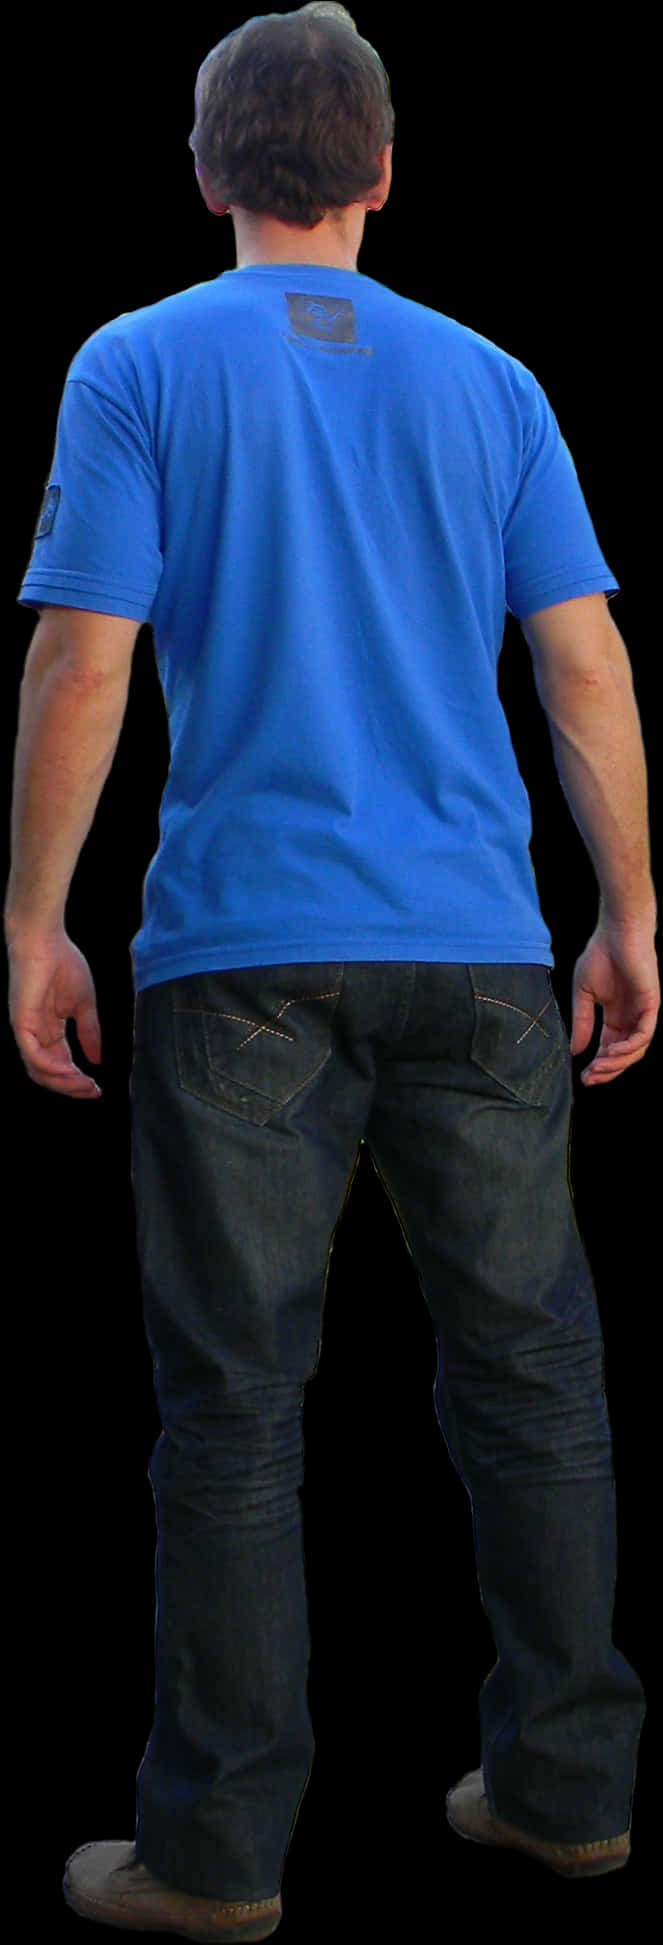 Manin Blue Shirt Standing Back View PNG image